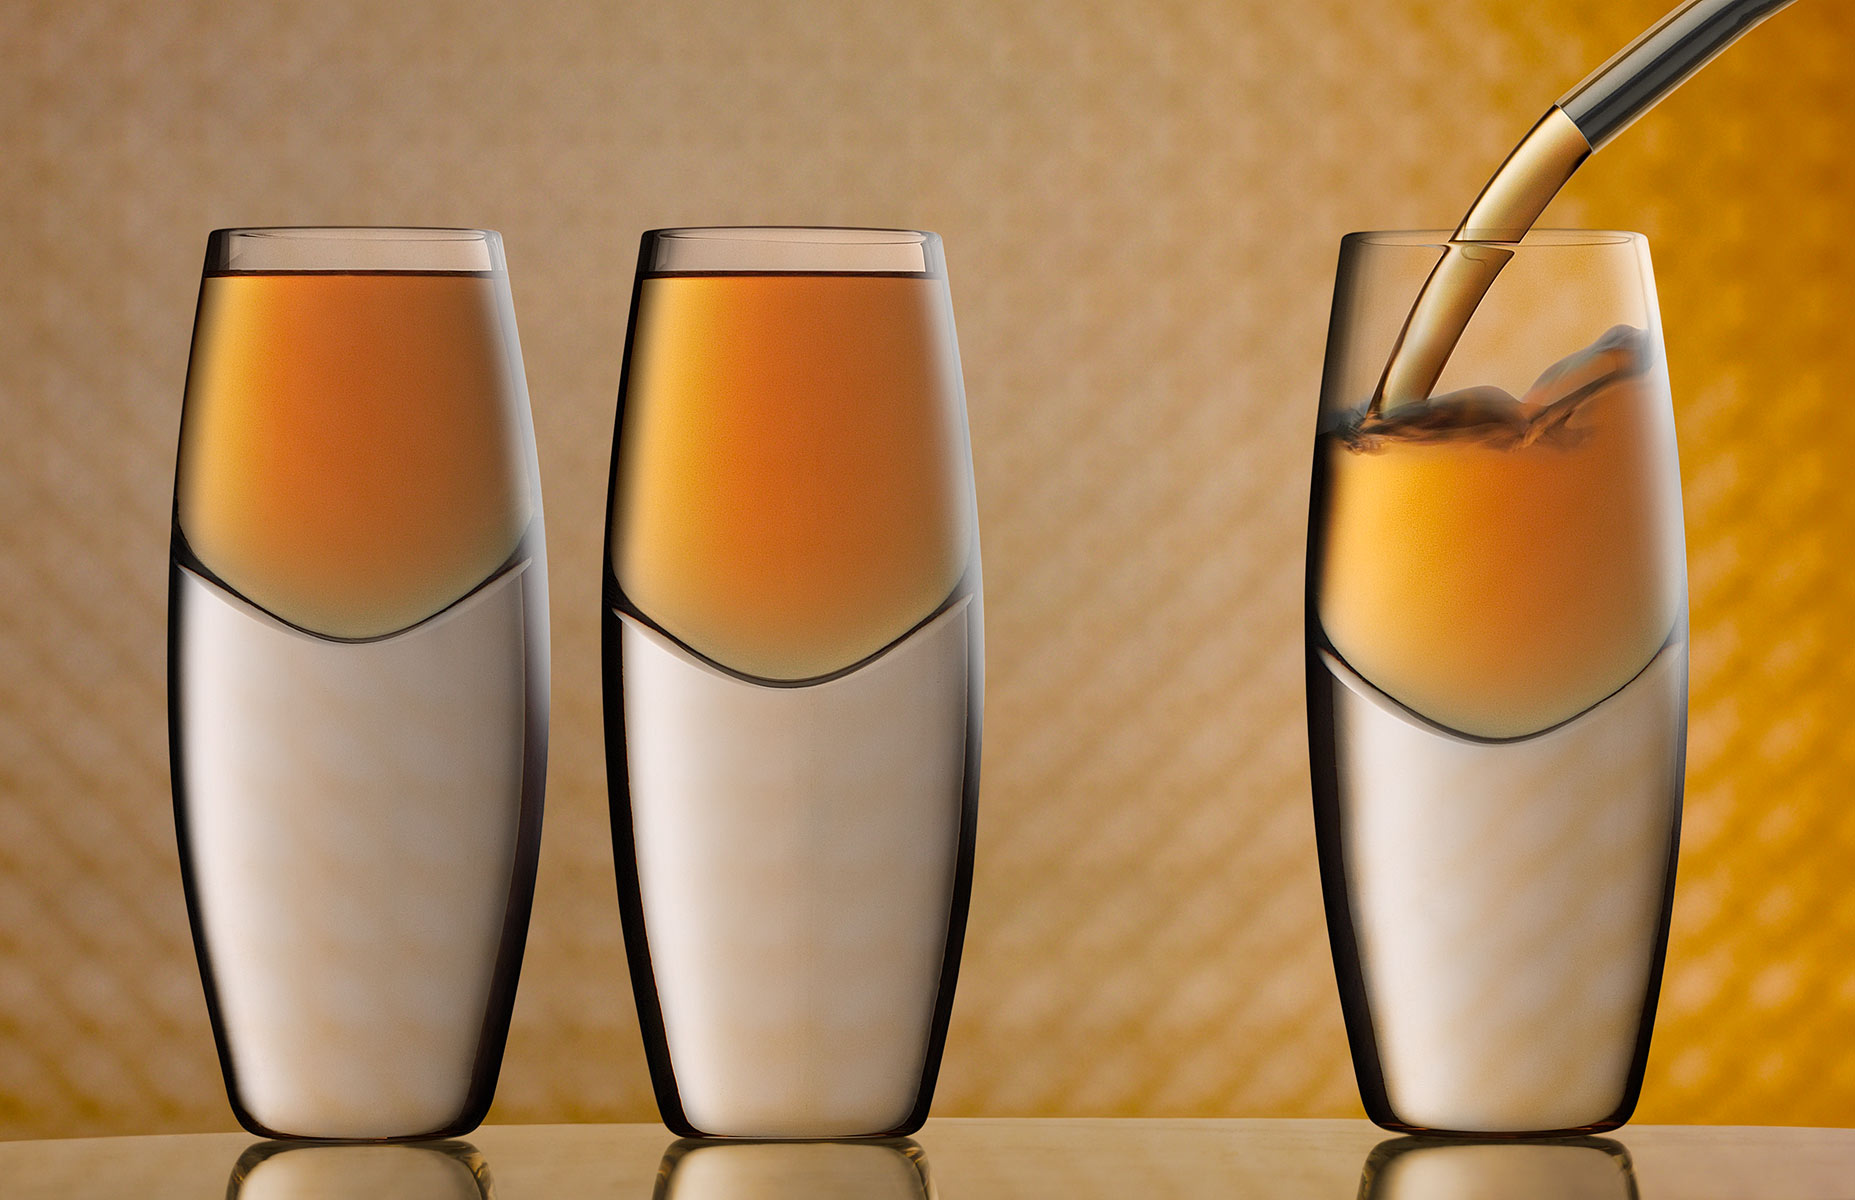 Three shots, the two on the left are already full with an aperitif pouring into the glass on the right side of frame. The background exhibits beautiful bokeh effects in the predominantly orange hue. The glasses are composed on a slightly reflective white with black and grey veined marble surface. The image is cropped horizontally and the camera is dead-on to the subject.